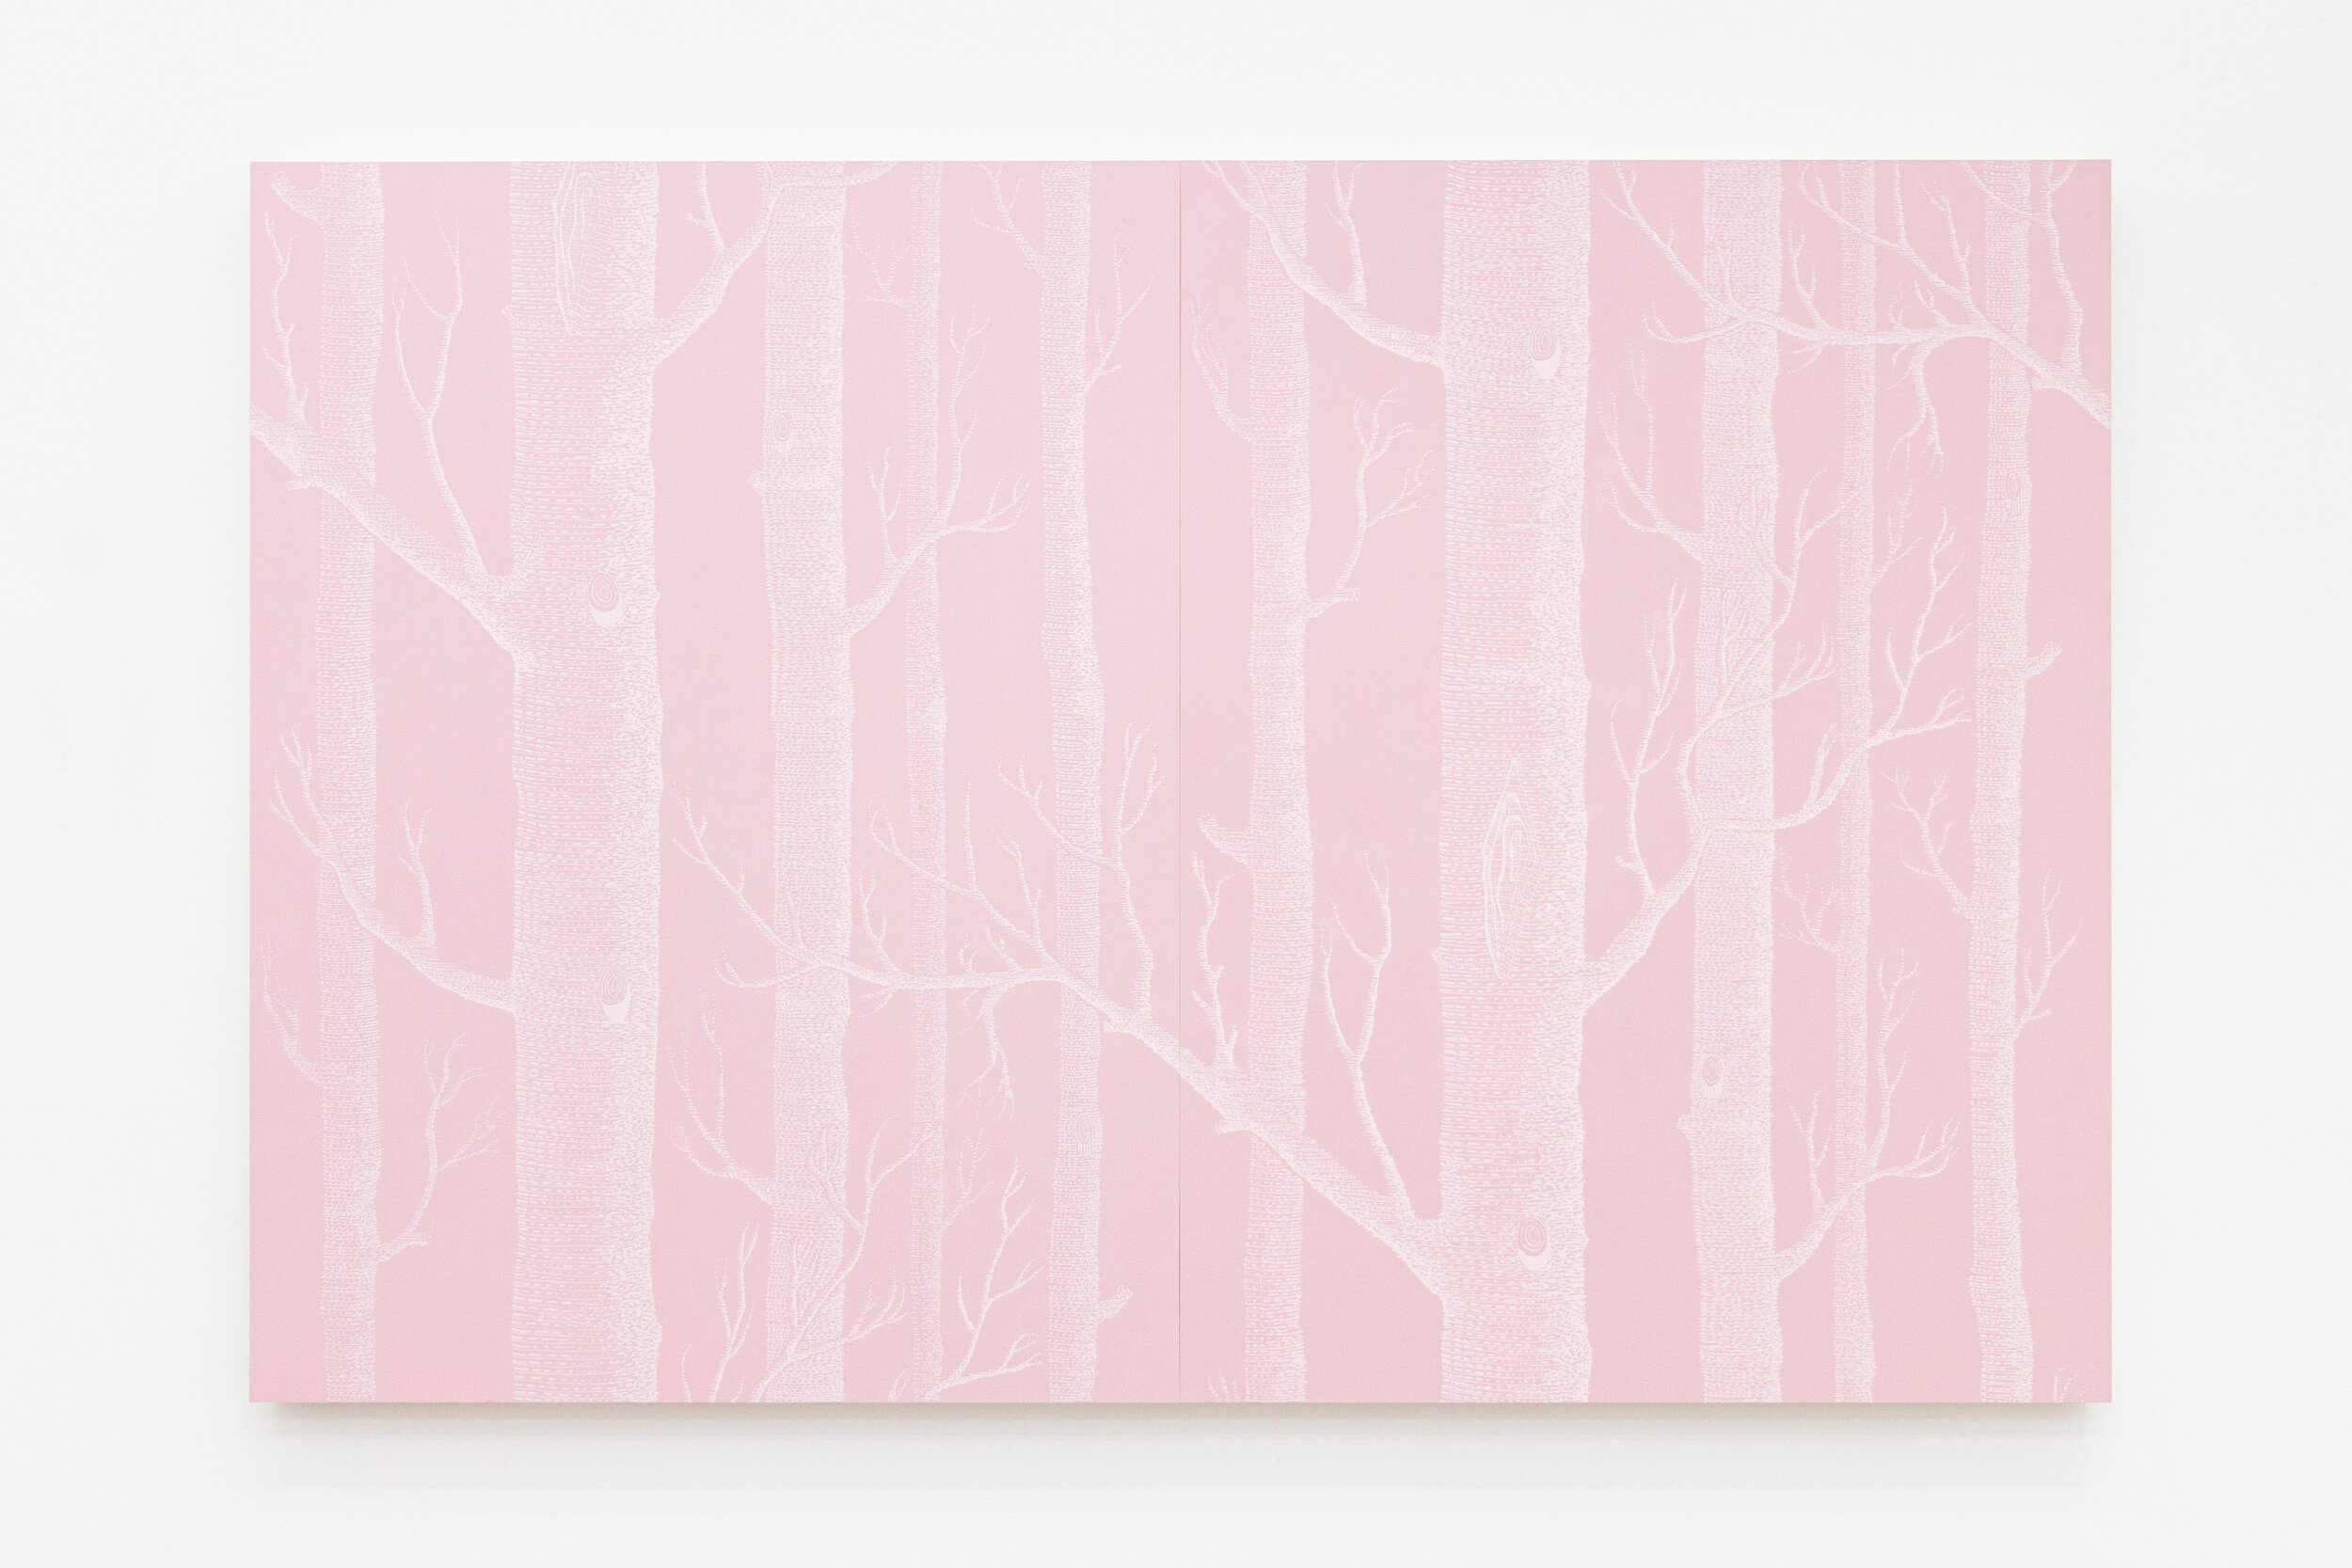   Untitled (Woods) , 2021, flashe on paper mounted on panel, 40 x 60 in (101.6 x 152.4 cm) 